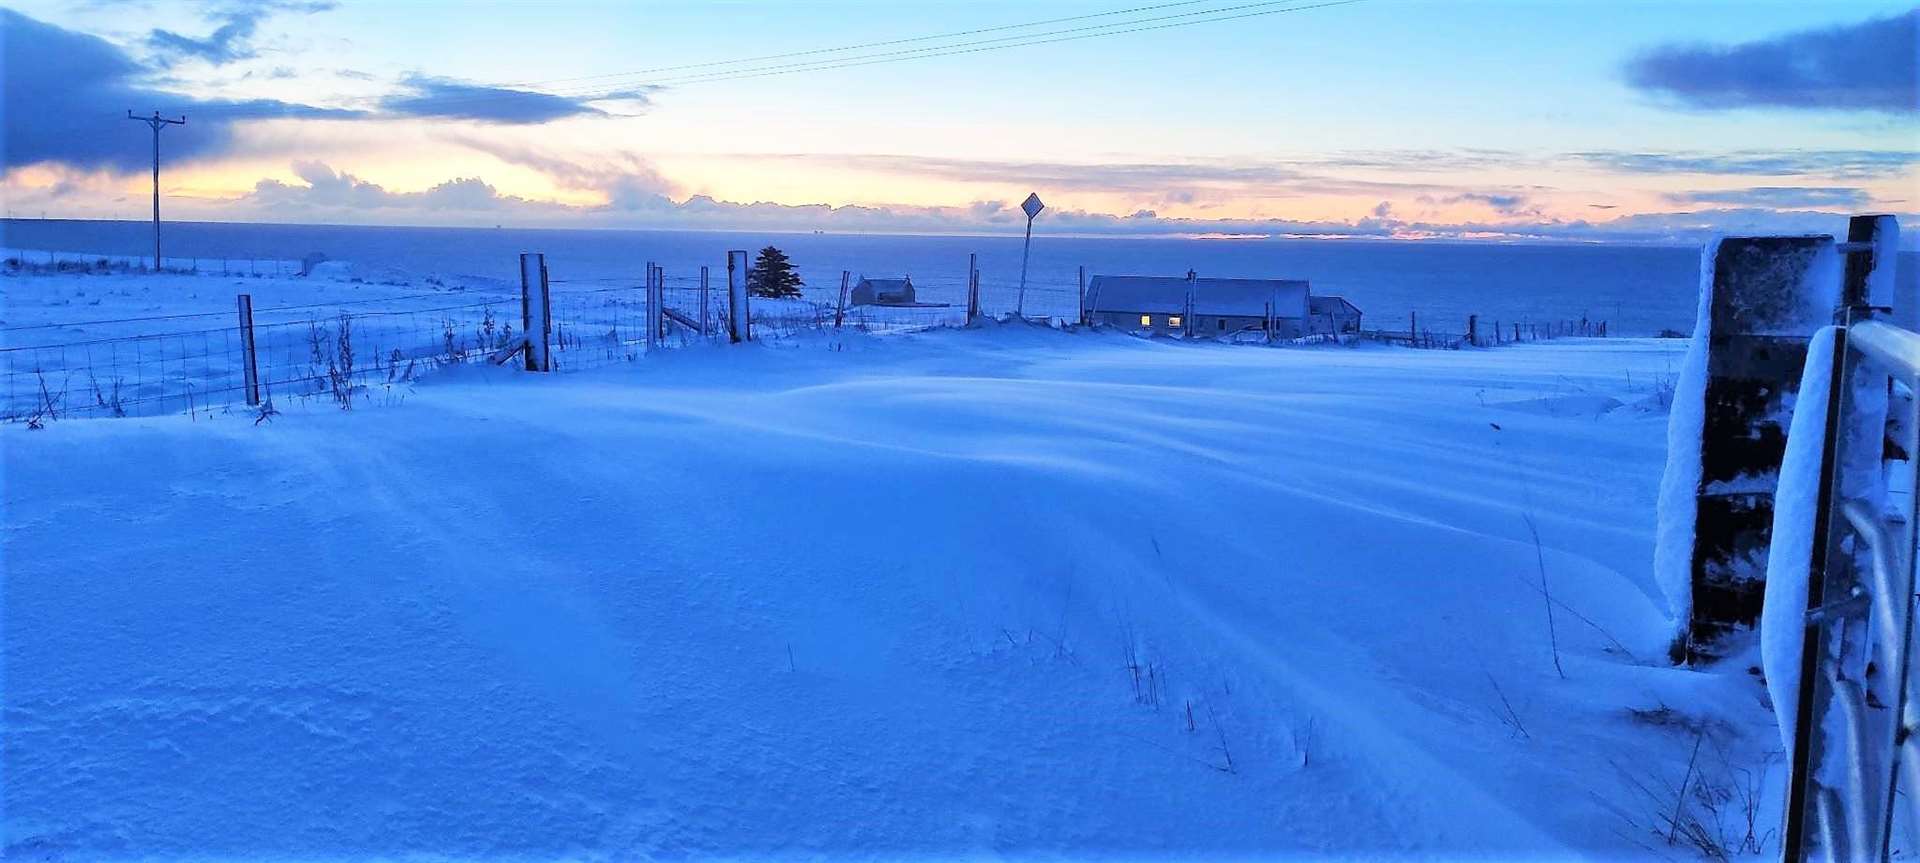 The Guidebest road was filled with snow and impassable for many residents. Picture: Tanya Fryer